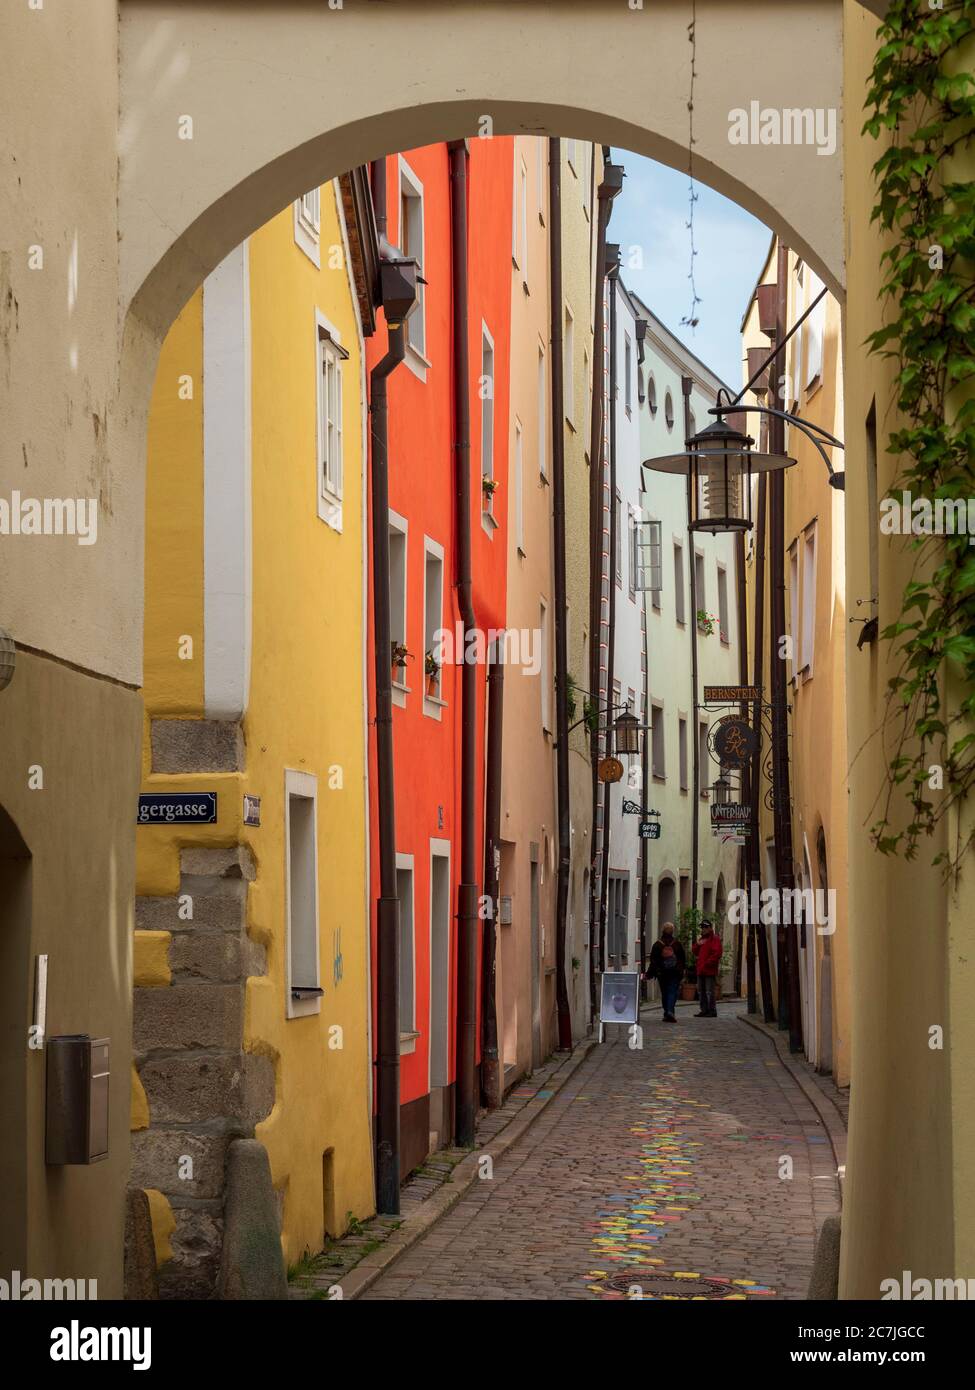 Alley, old town, Passau, Bavaria, Germany Stock Photo